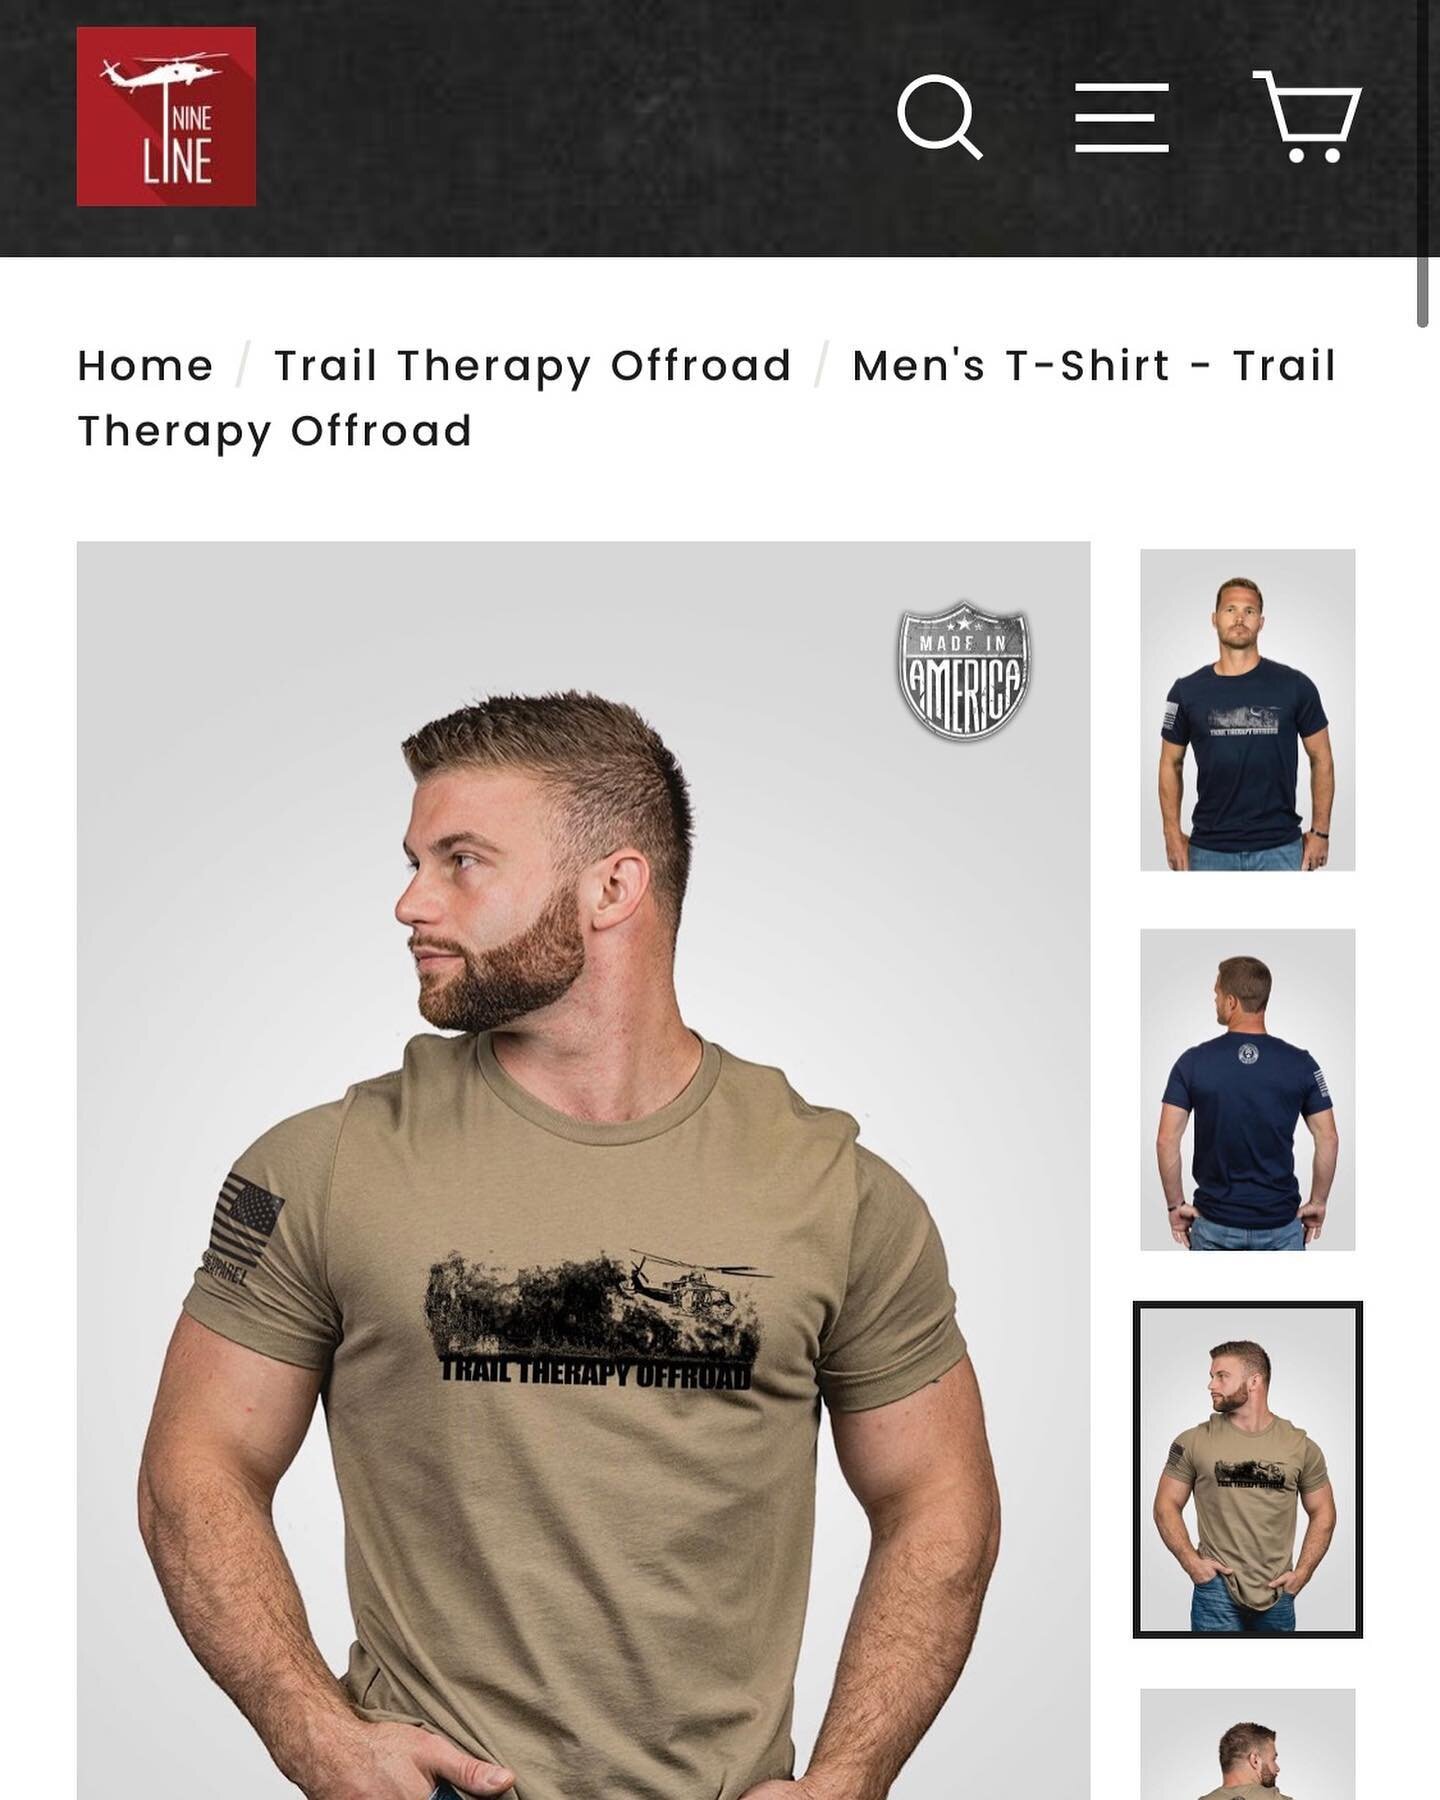 Nine Line Apparel/ Trail Therapy Offroad launch is live! 

Head on over to ninelineapparel.com and click on Limited Editions to throw some swag in the cart! Thank you for your continued support! 

~~~

Trail Therapy Offroad is a 501(c)(3) organizatio